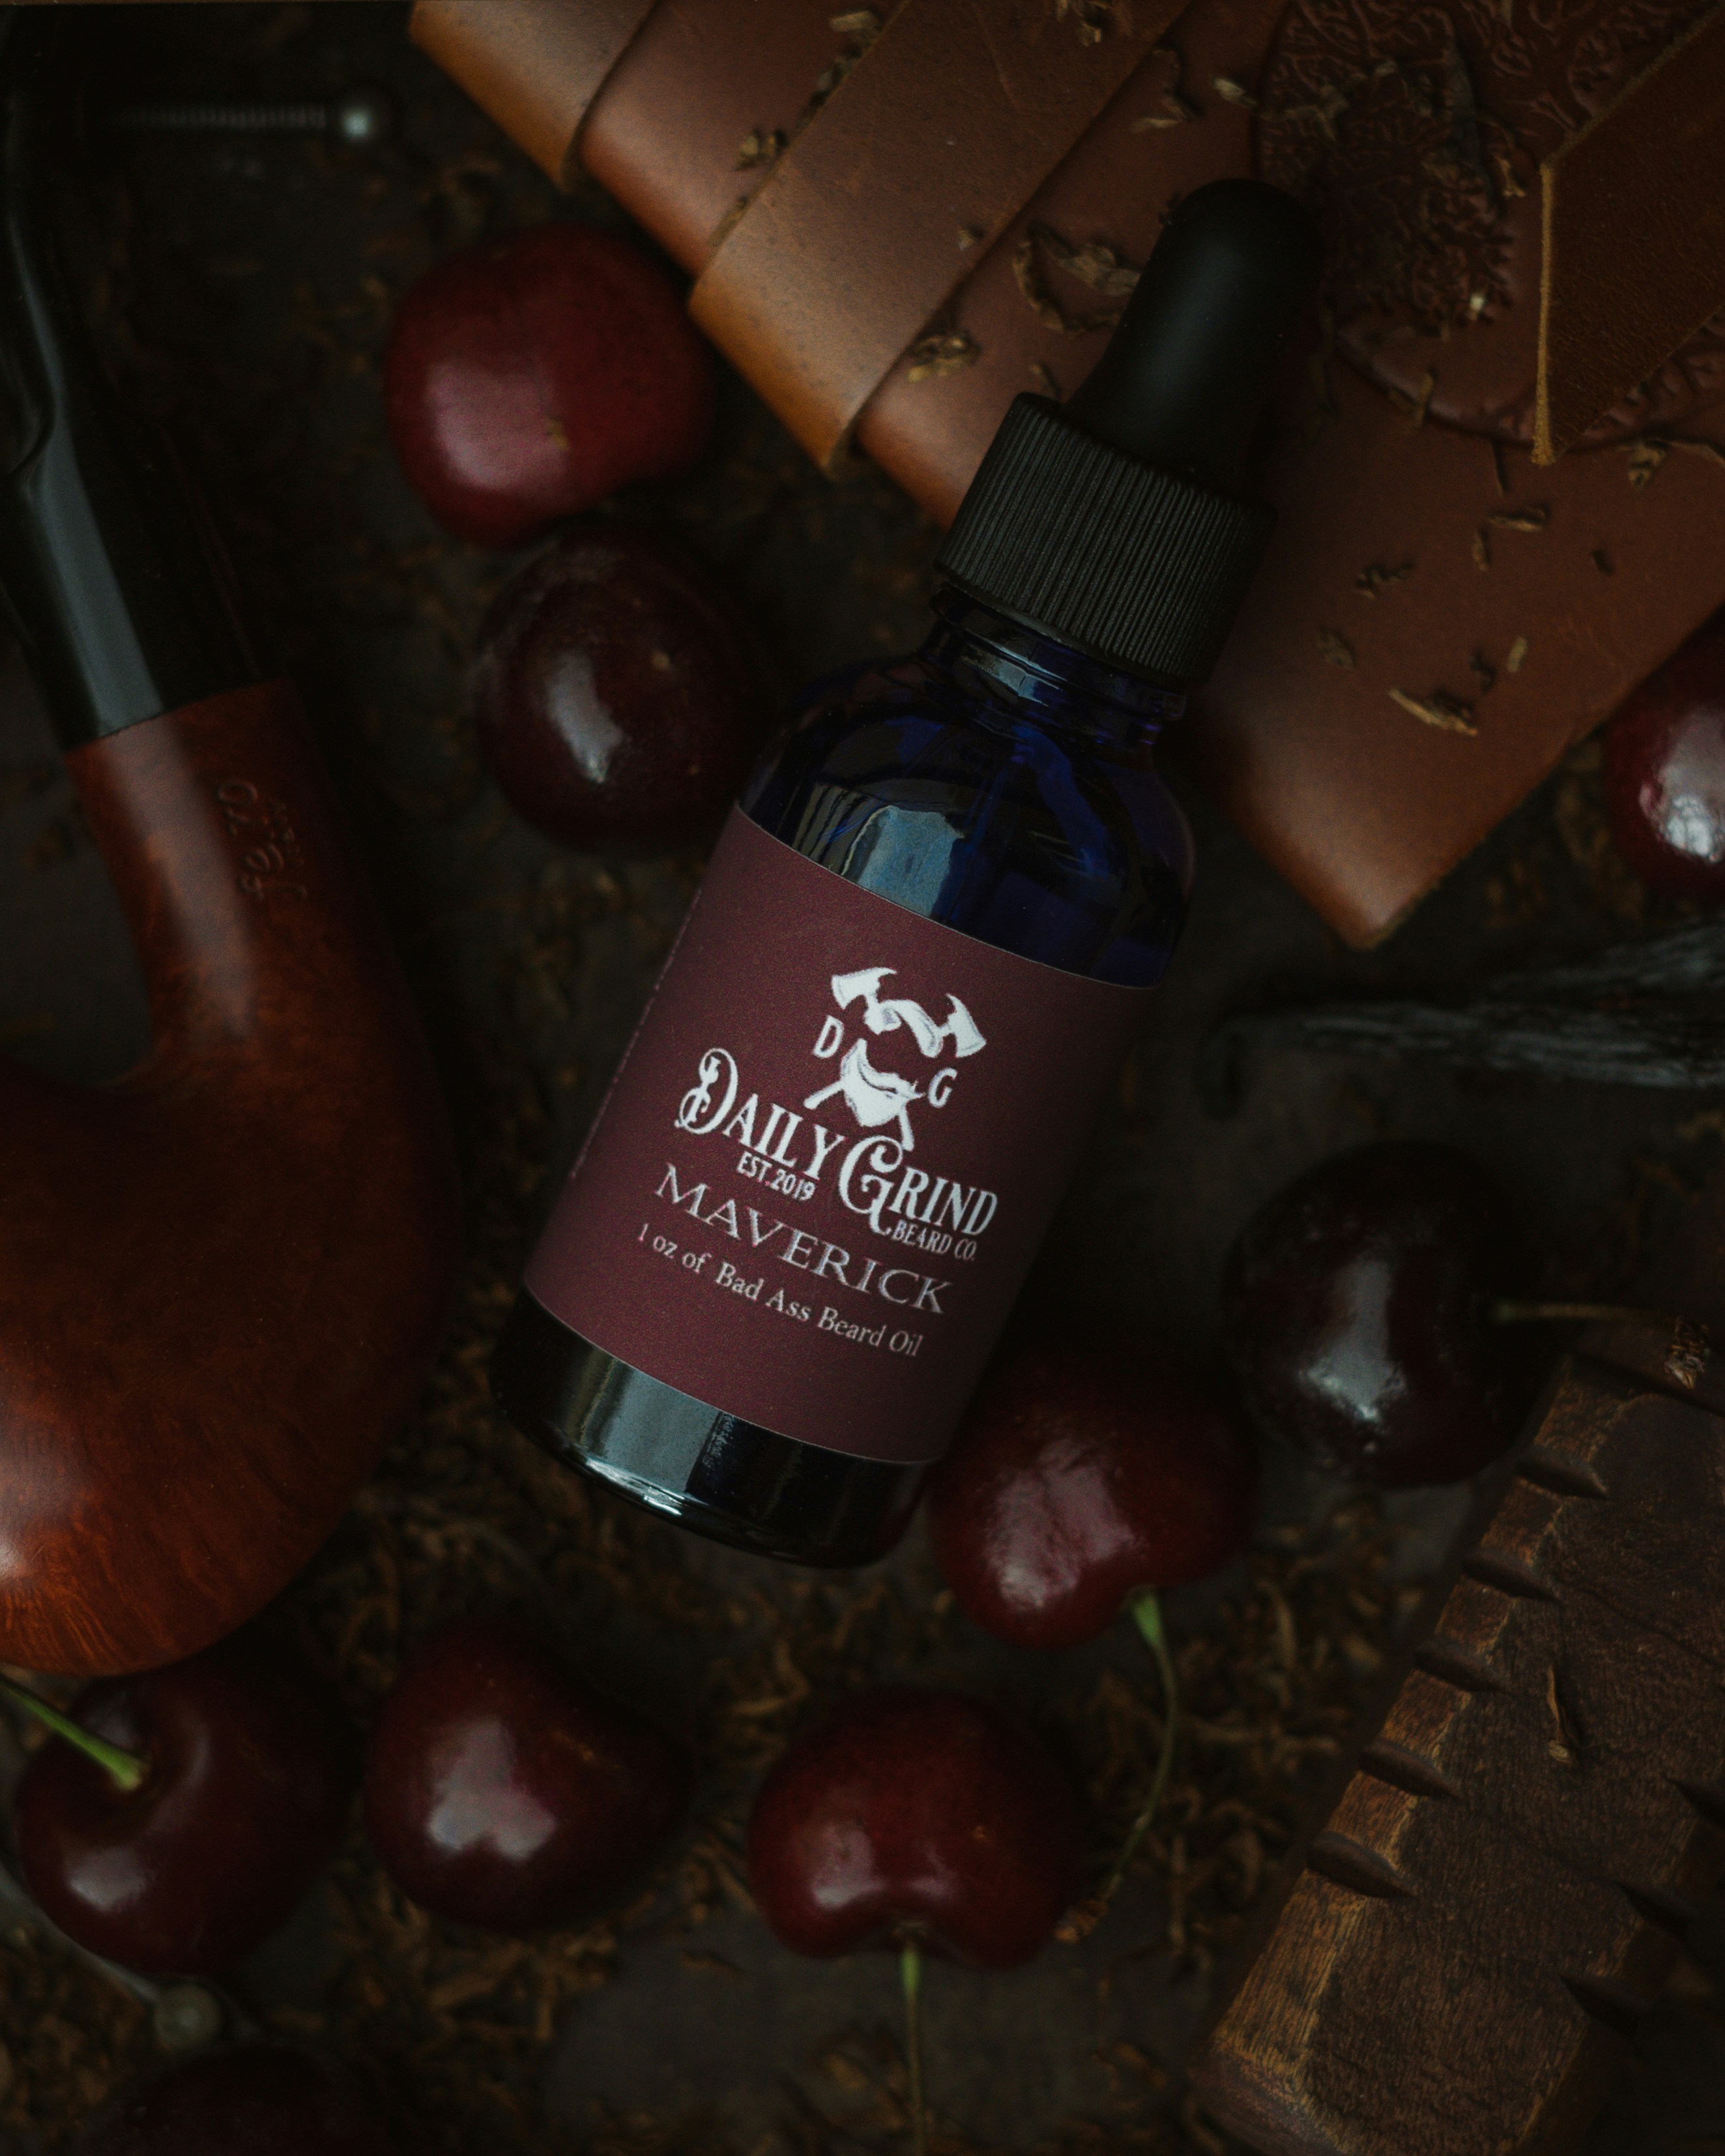 Product photo of Maverick Beard Oil by Daily Grind Beard Co. Product Photography by branding photographer Lance Reis in Portland Oregon. Elements of Tobacco, Wood, Cherry, and Vanilla were added to visually showcase the scents you can expect with Maverick. Did you discover us here? Say hi on insta: Kickassdesigns & daily_grind_beard_co